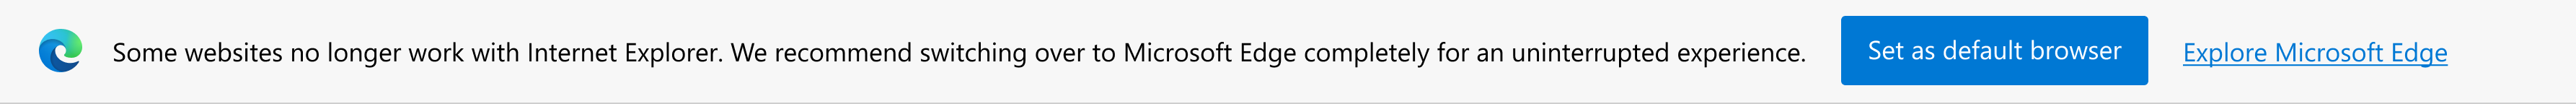 Notification about modern sites and prompt to set Microsoft Edge as default browser or explore Microsoft Edge.